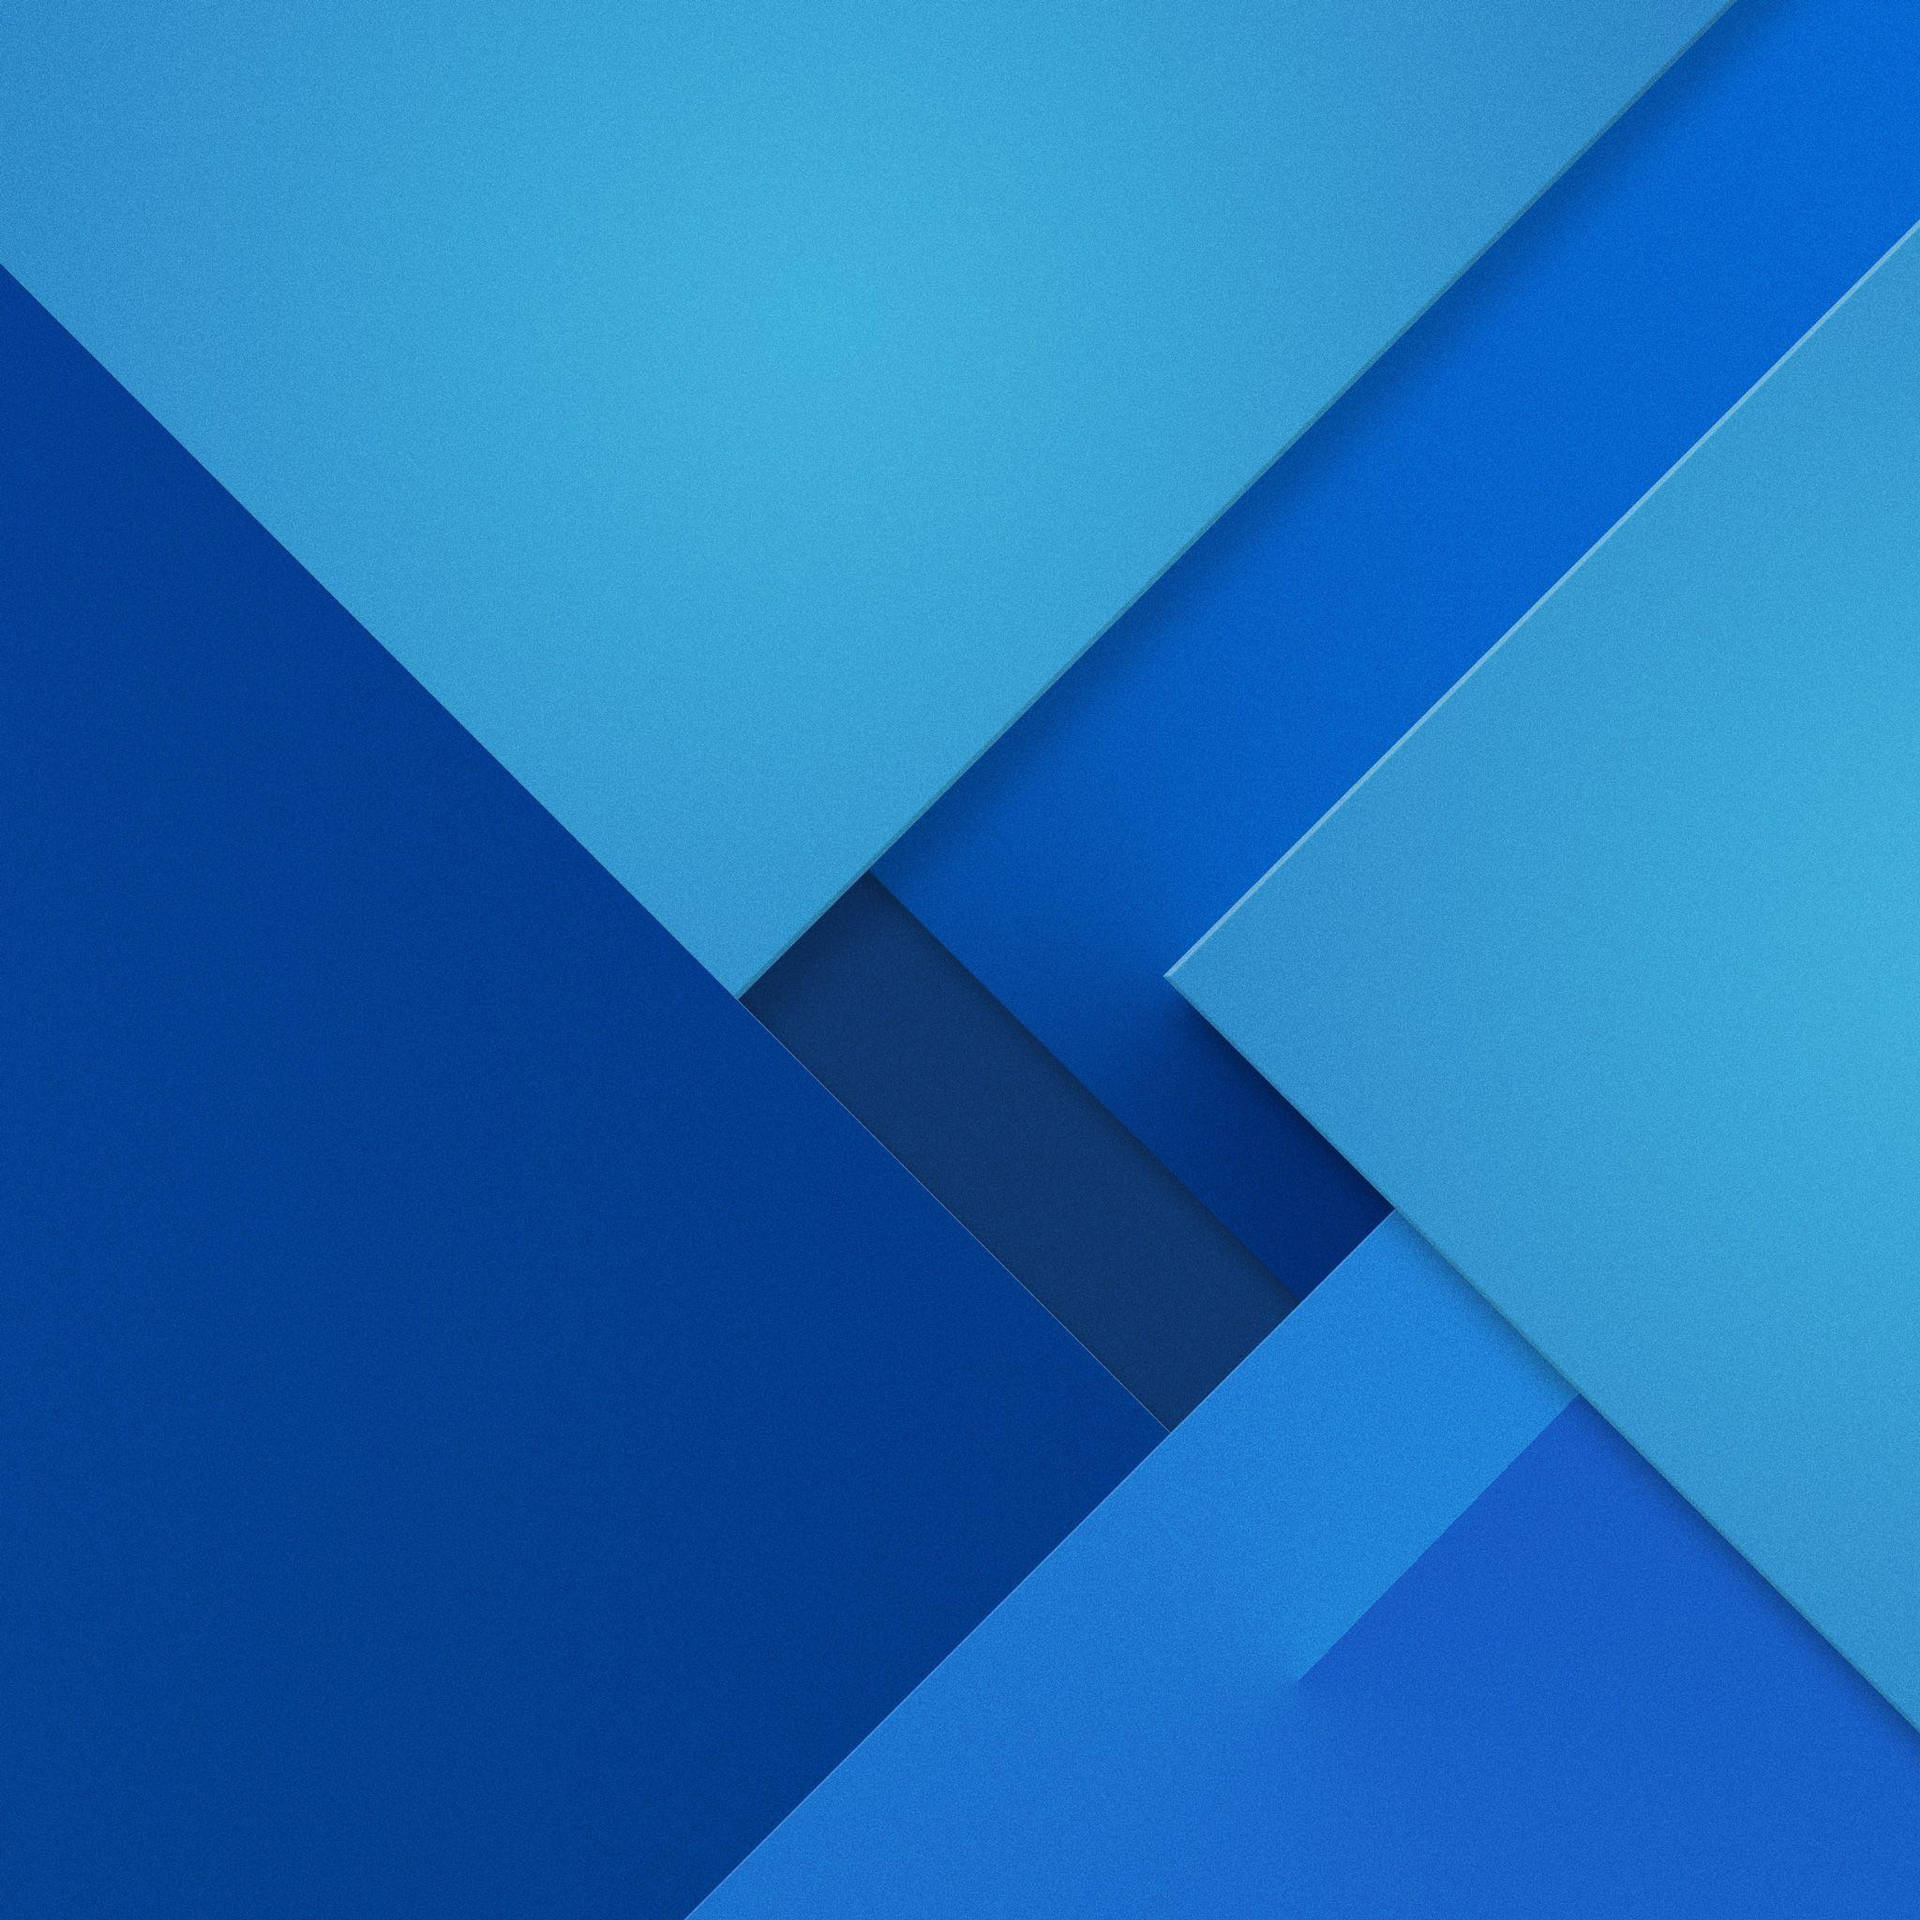 Blue Angled Lines Samsung Galaxy Tablet Background